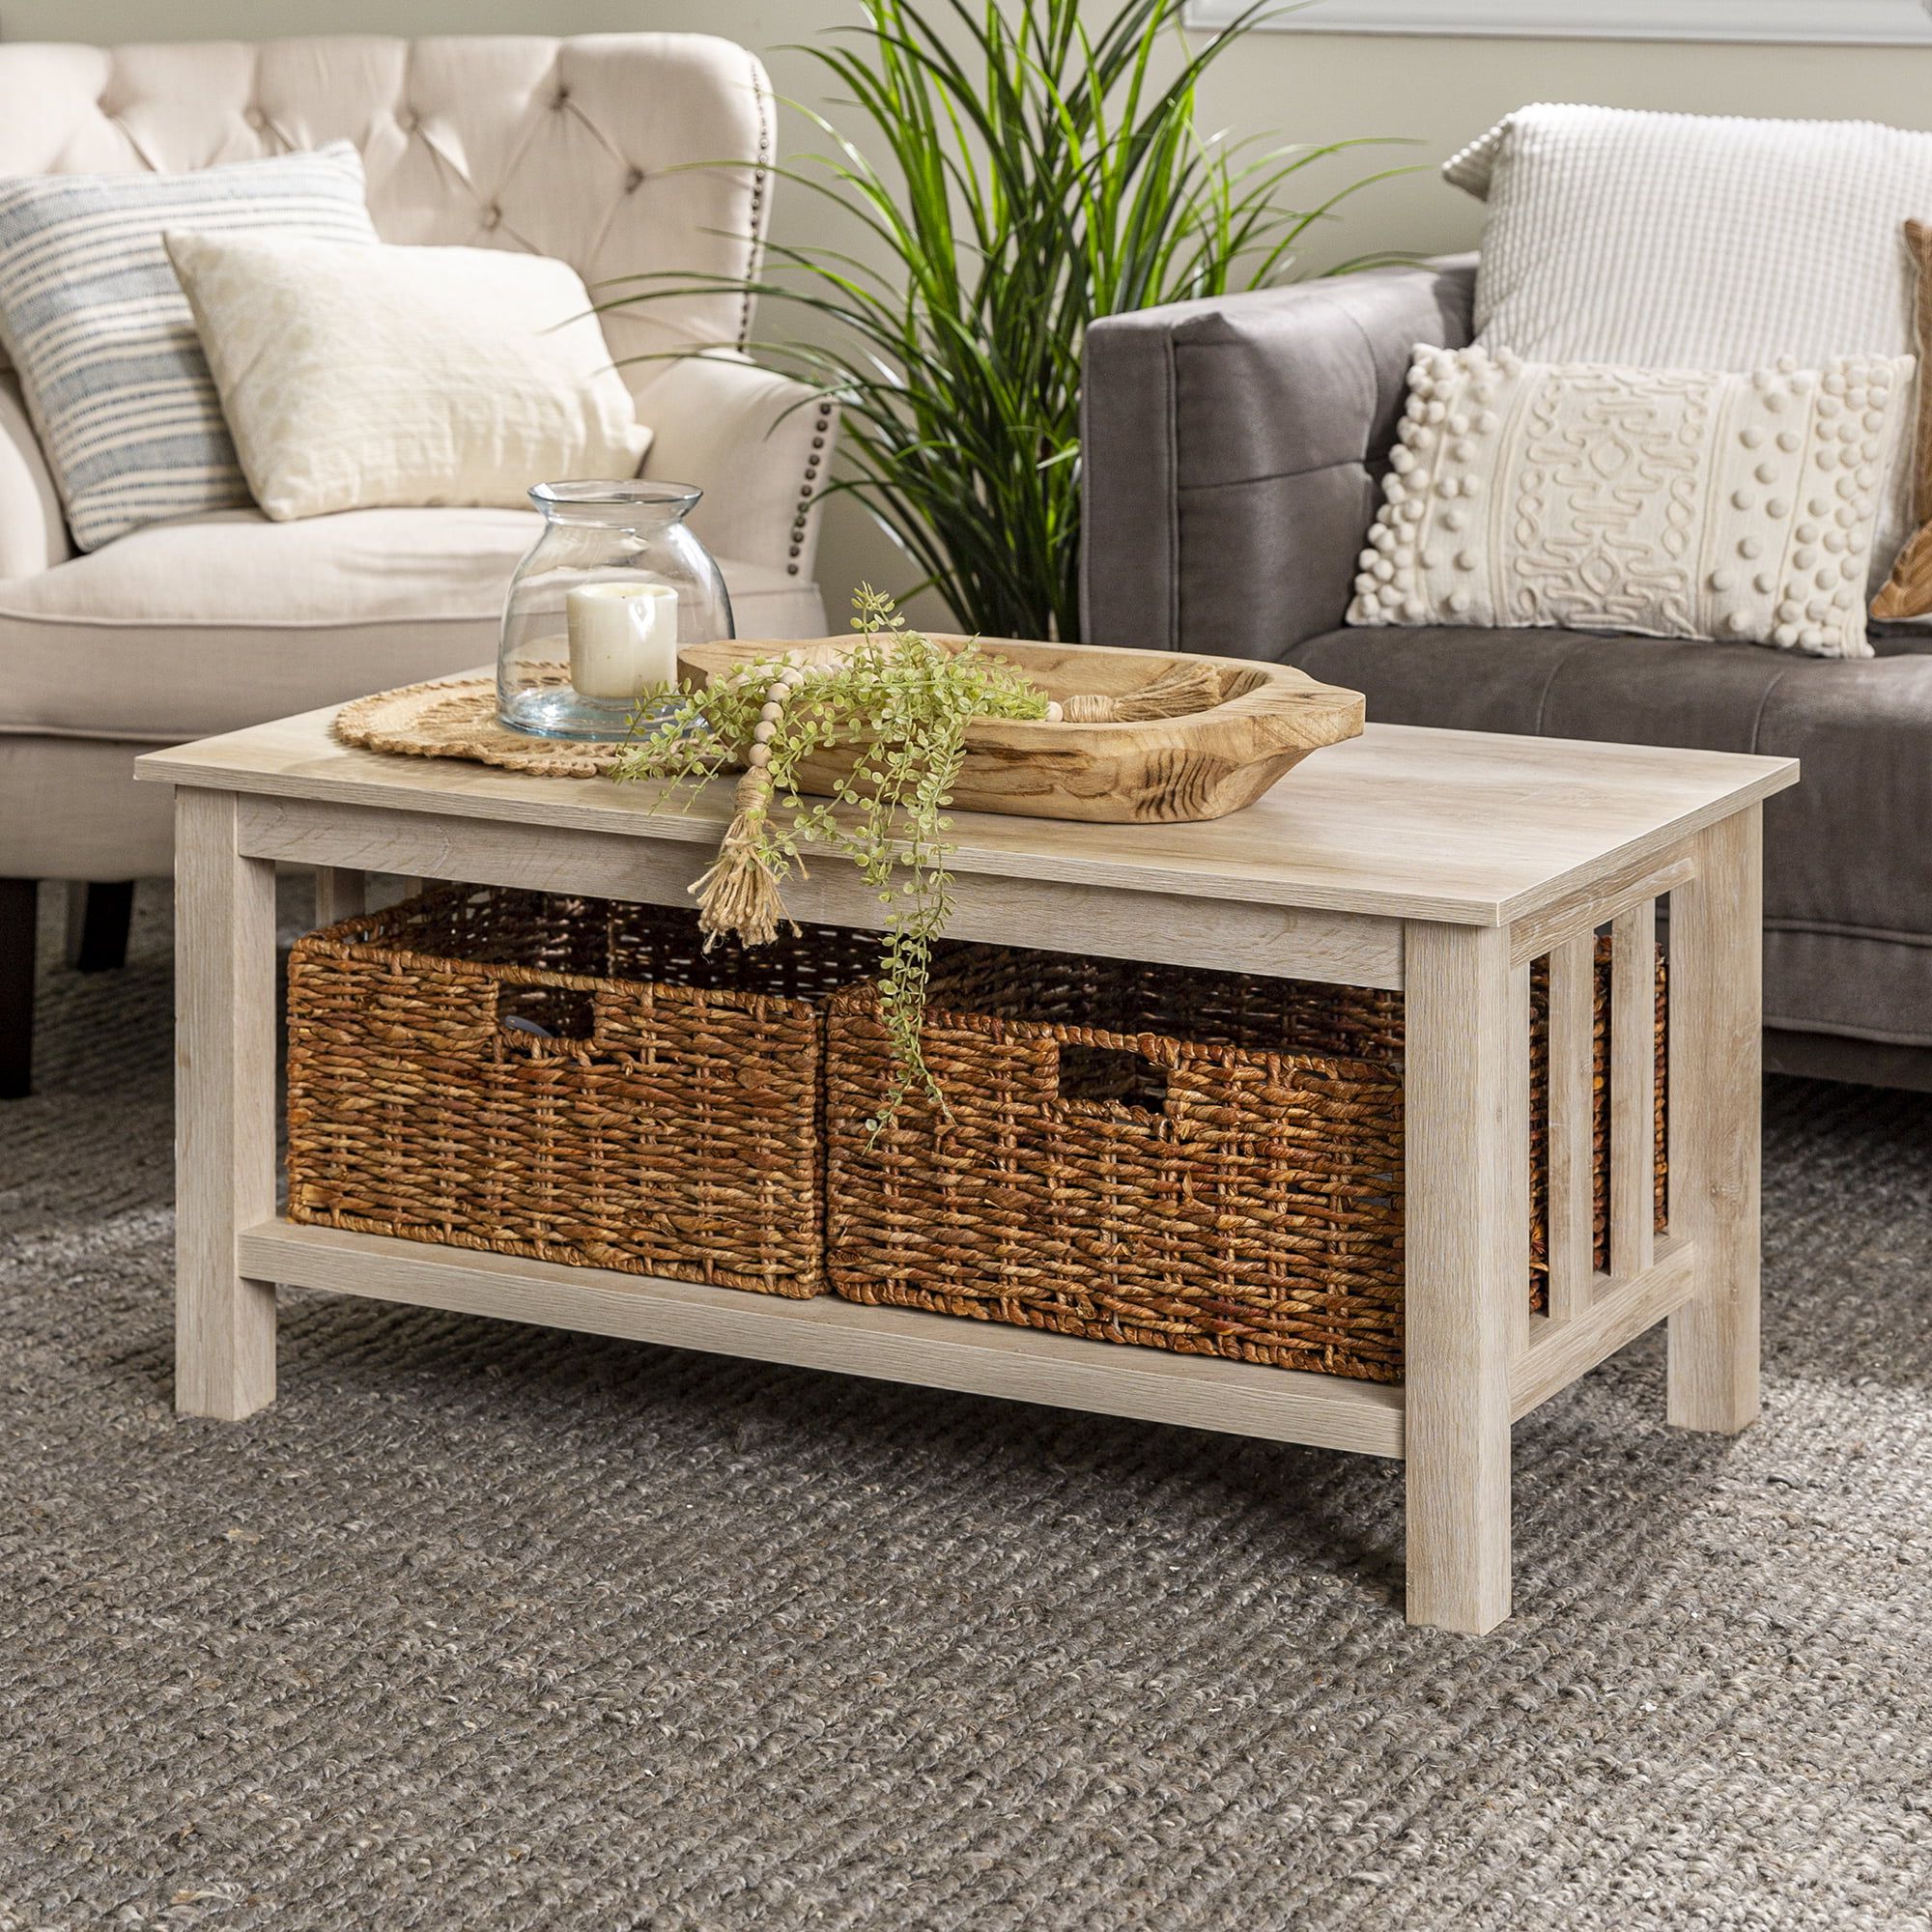 Woven Paths Traditional Storage Coffee Table With Bins, White Oak –  Walmart With 2019 Oak Espresso Coffee Tables (View 13 of 20)